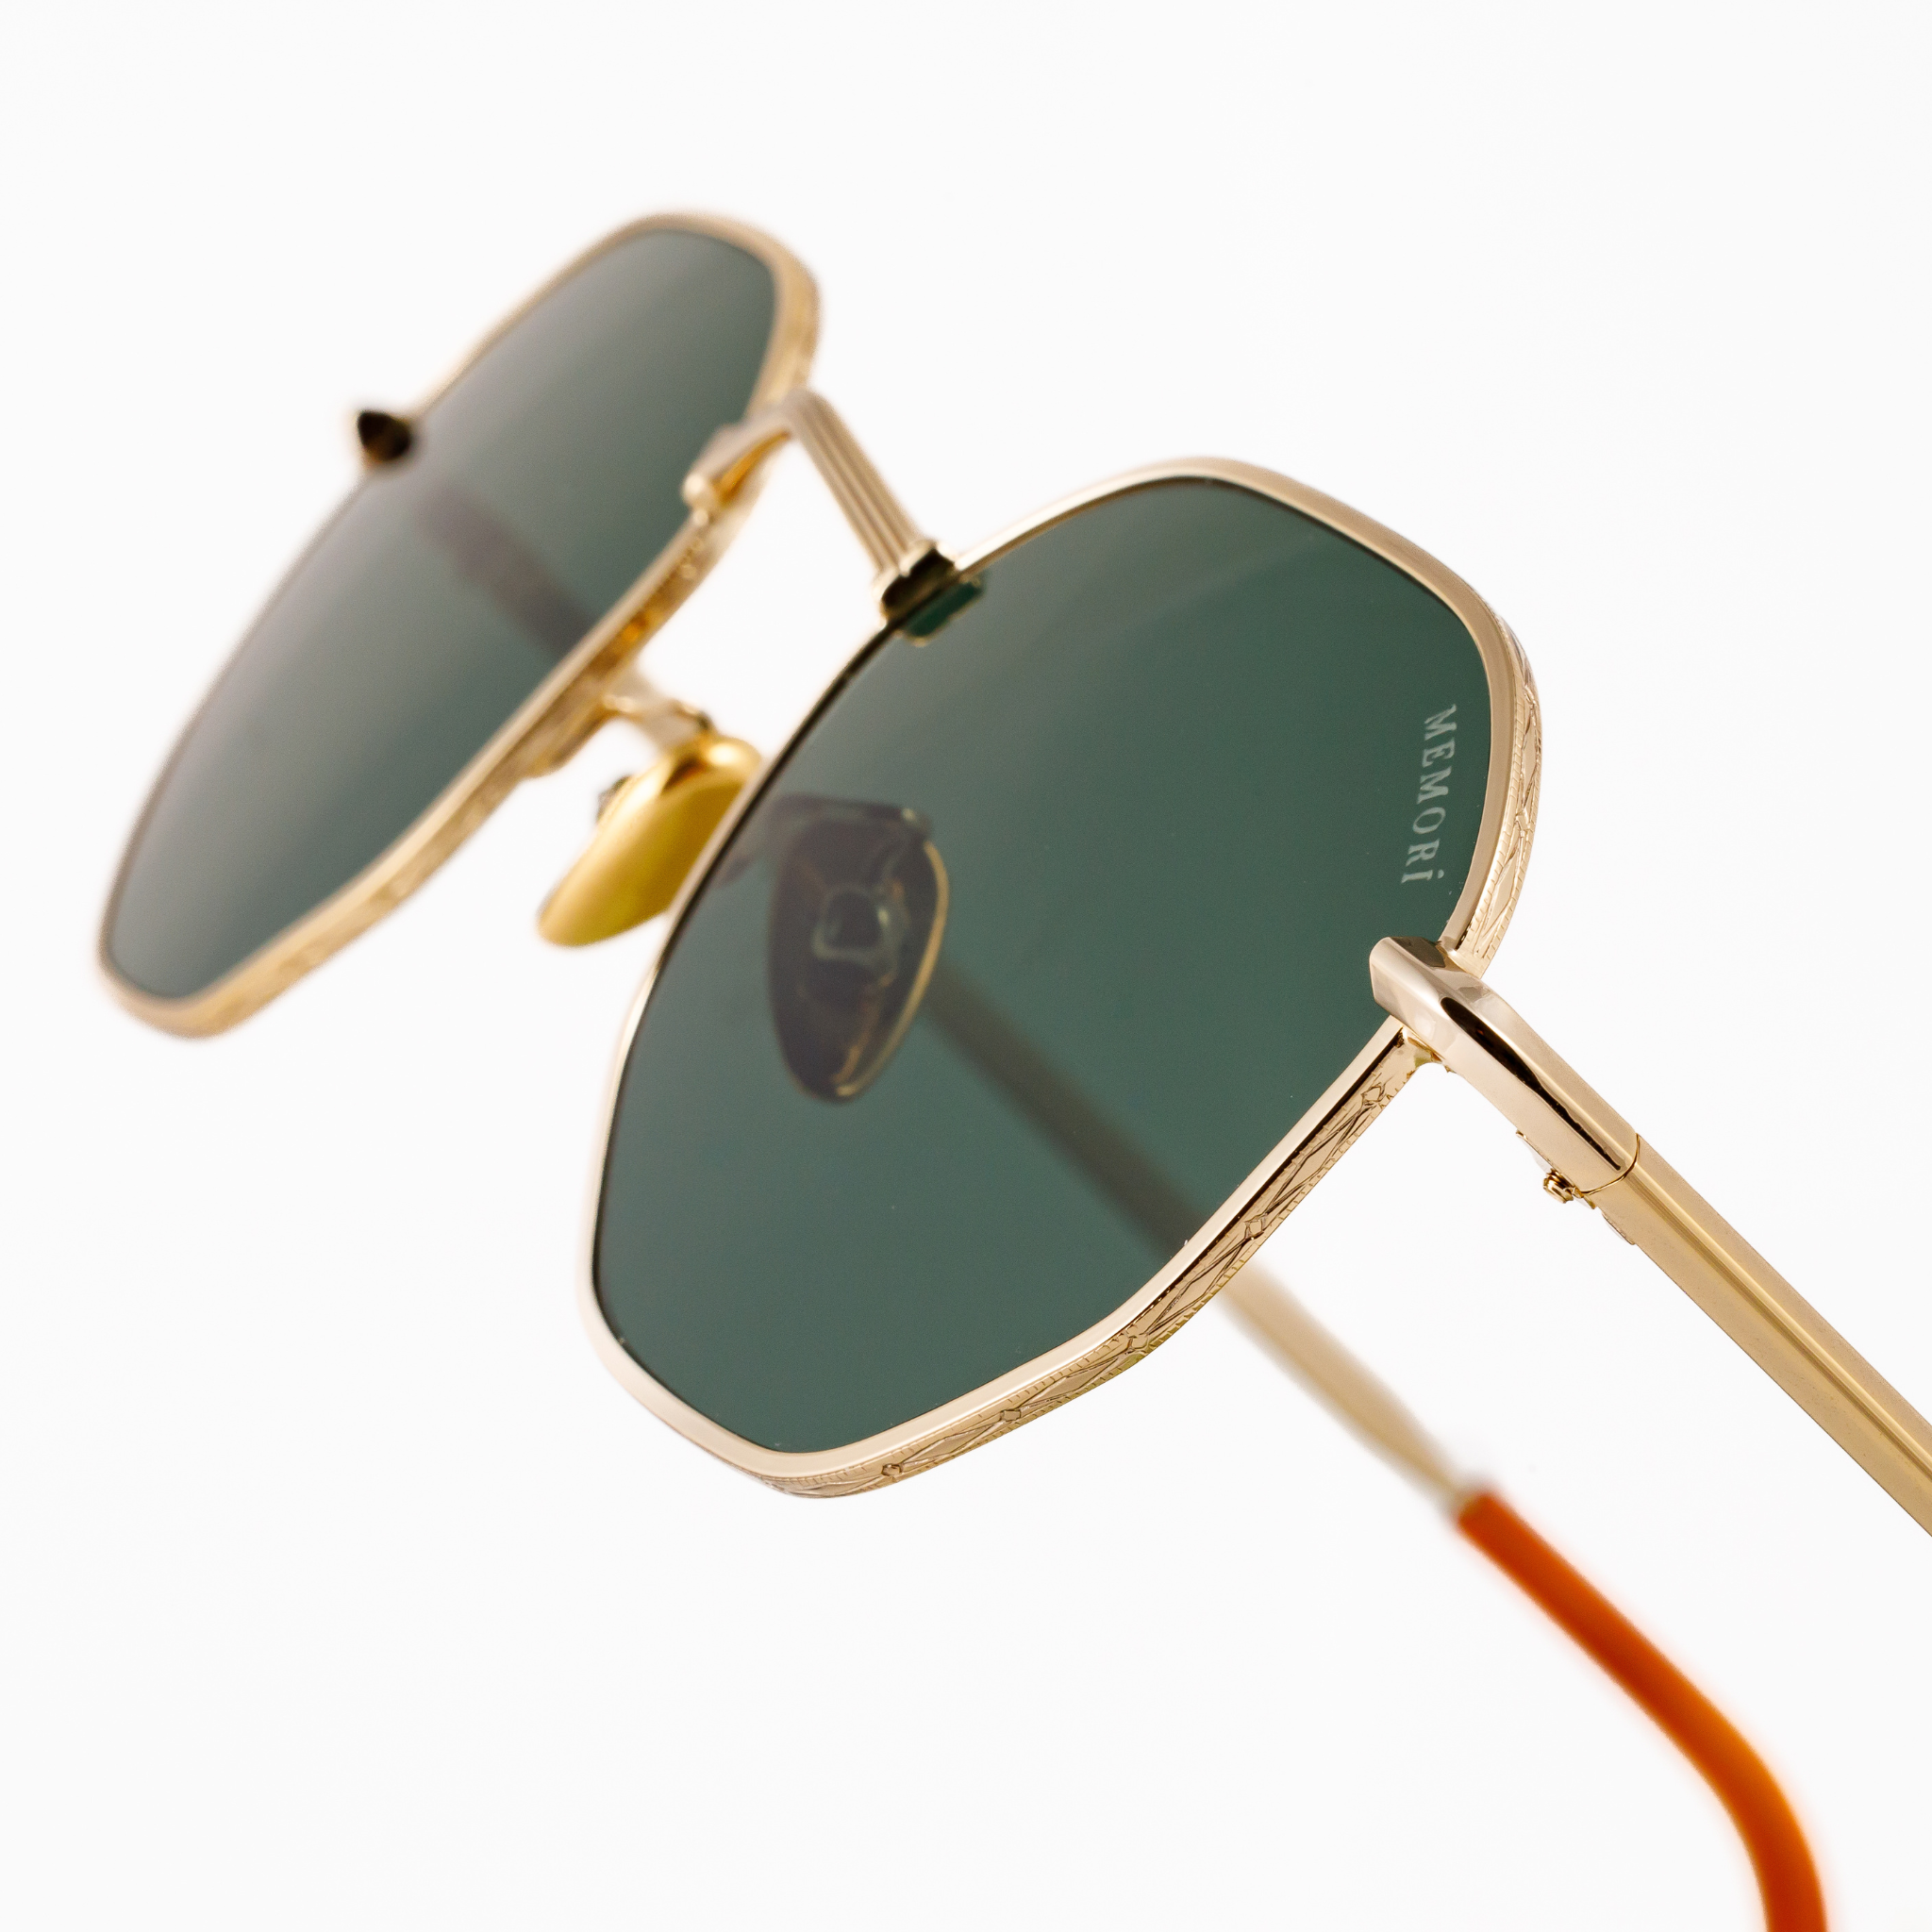 Best gold metal hexagon sunglasses for small faces for men or women. Features V nose bridge and green lenses. macro view shows edge detailing.